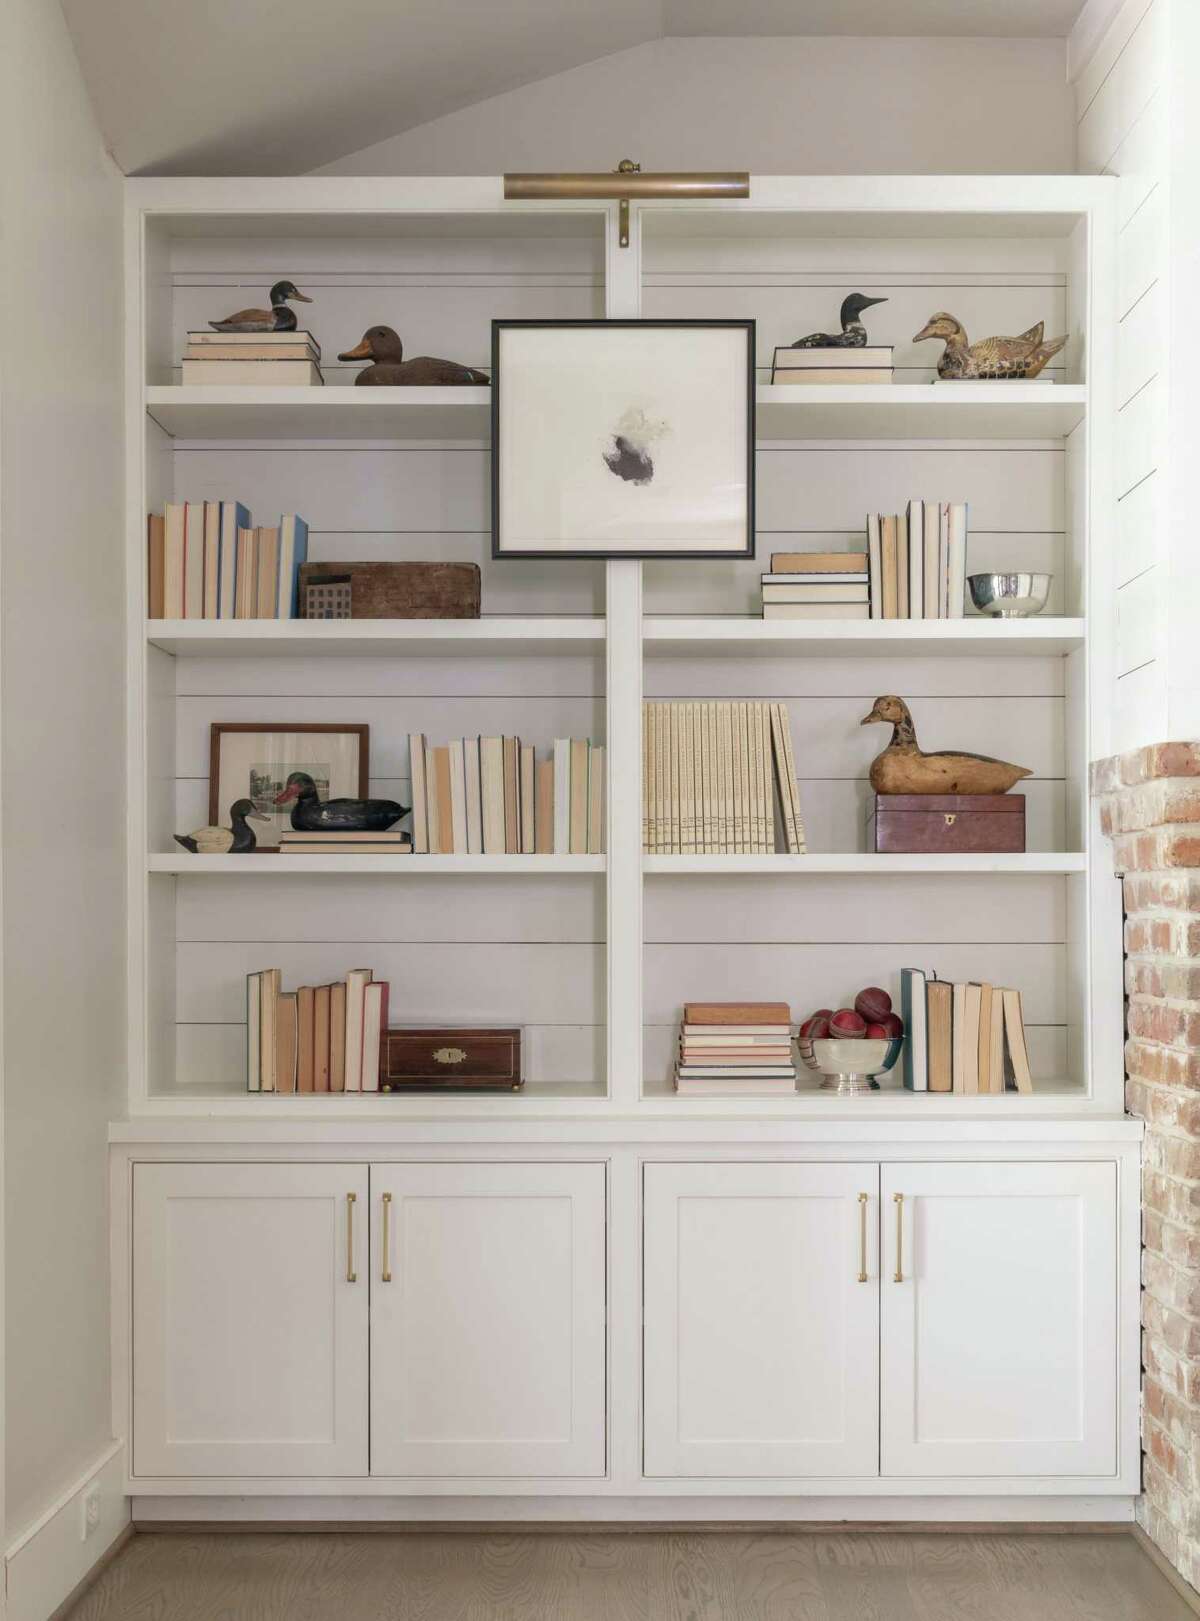 Get your bookshelves in order — everyone’s watching